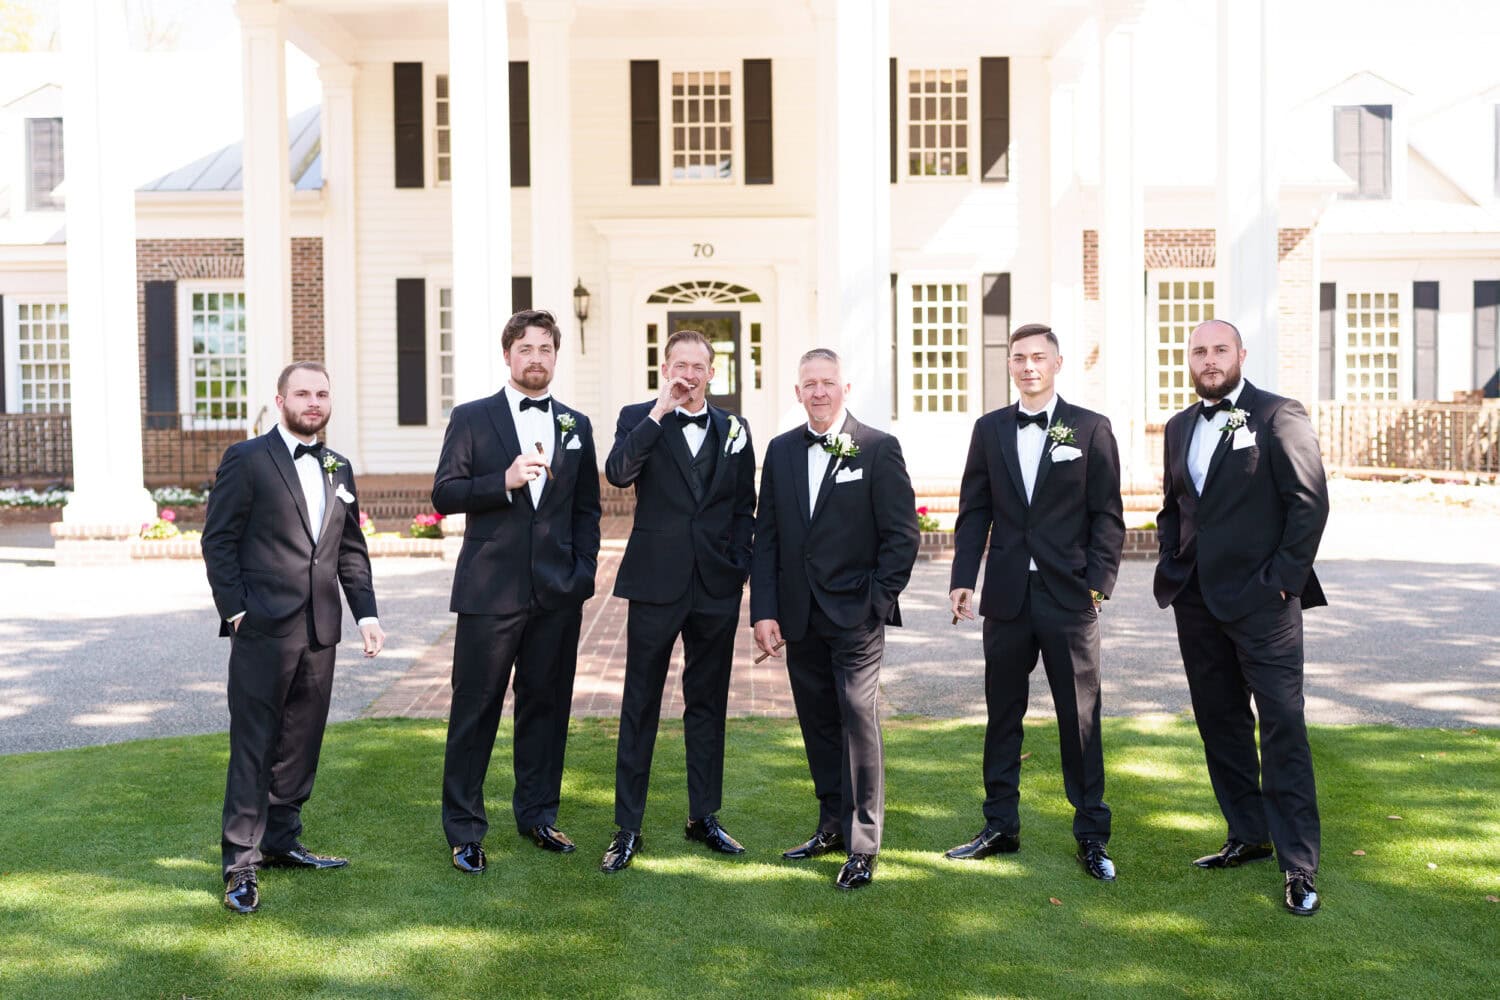 Portraits of the groom and groomsmen in front of the clubhouse - Pawleys Plantation